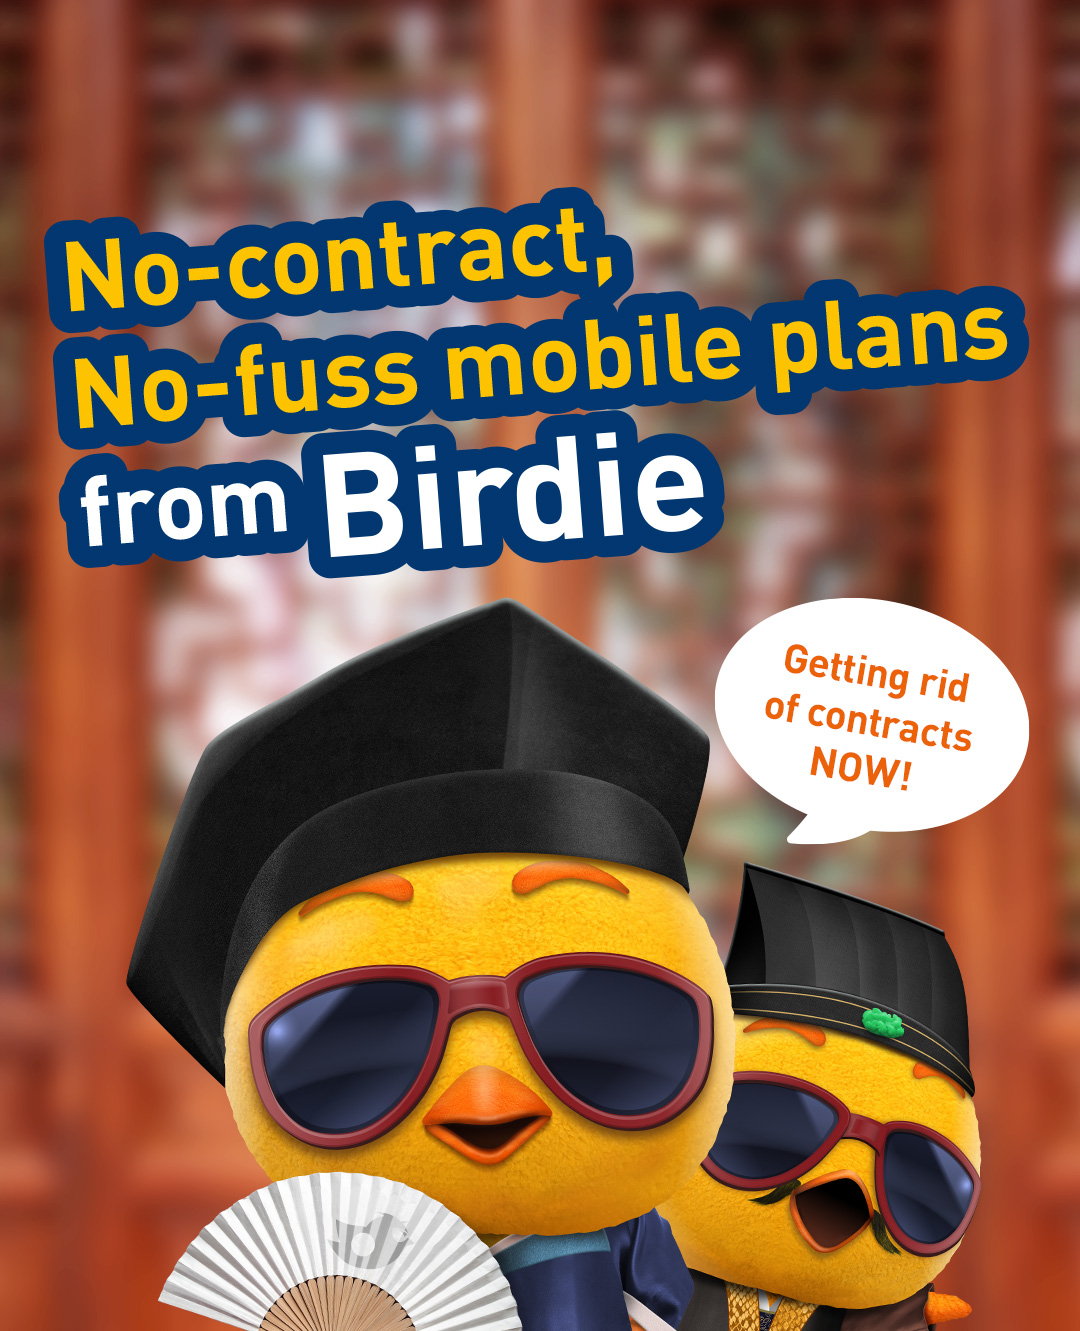 Birdie | Getting rid of contracts NOW!